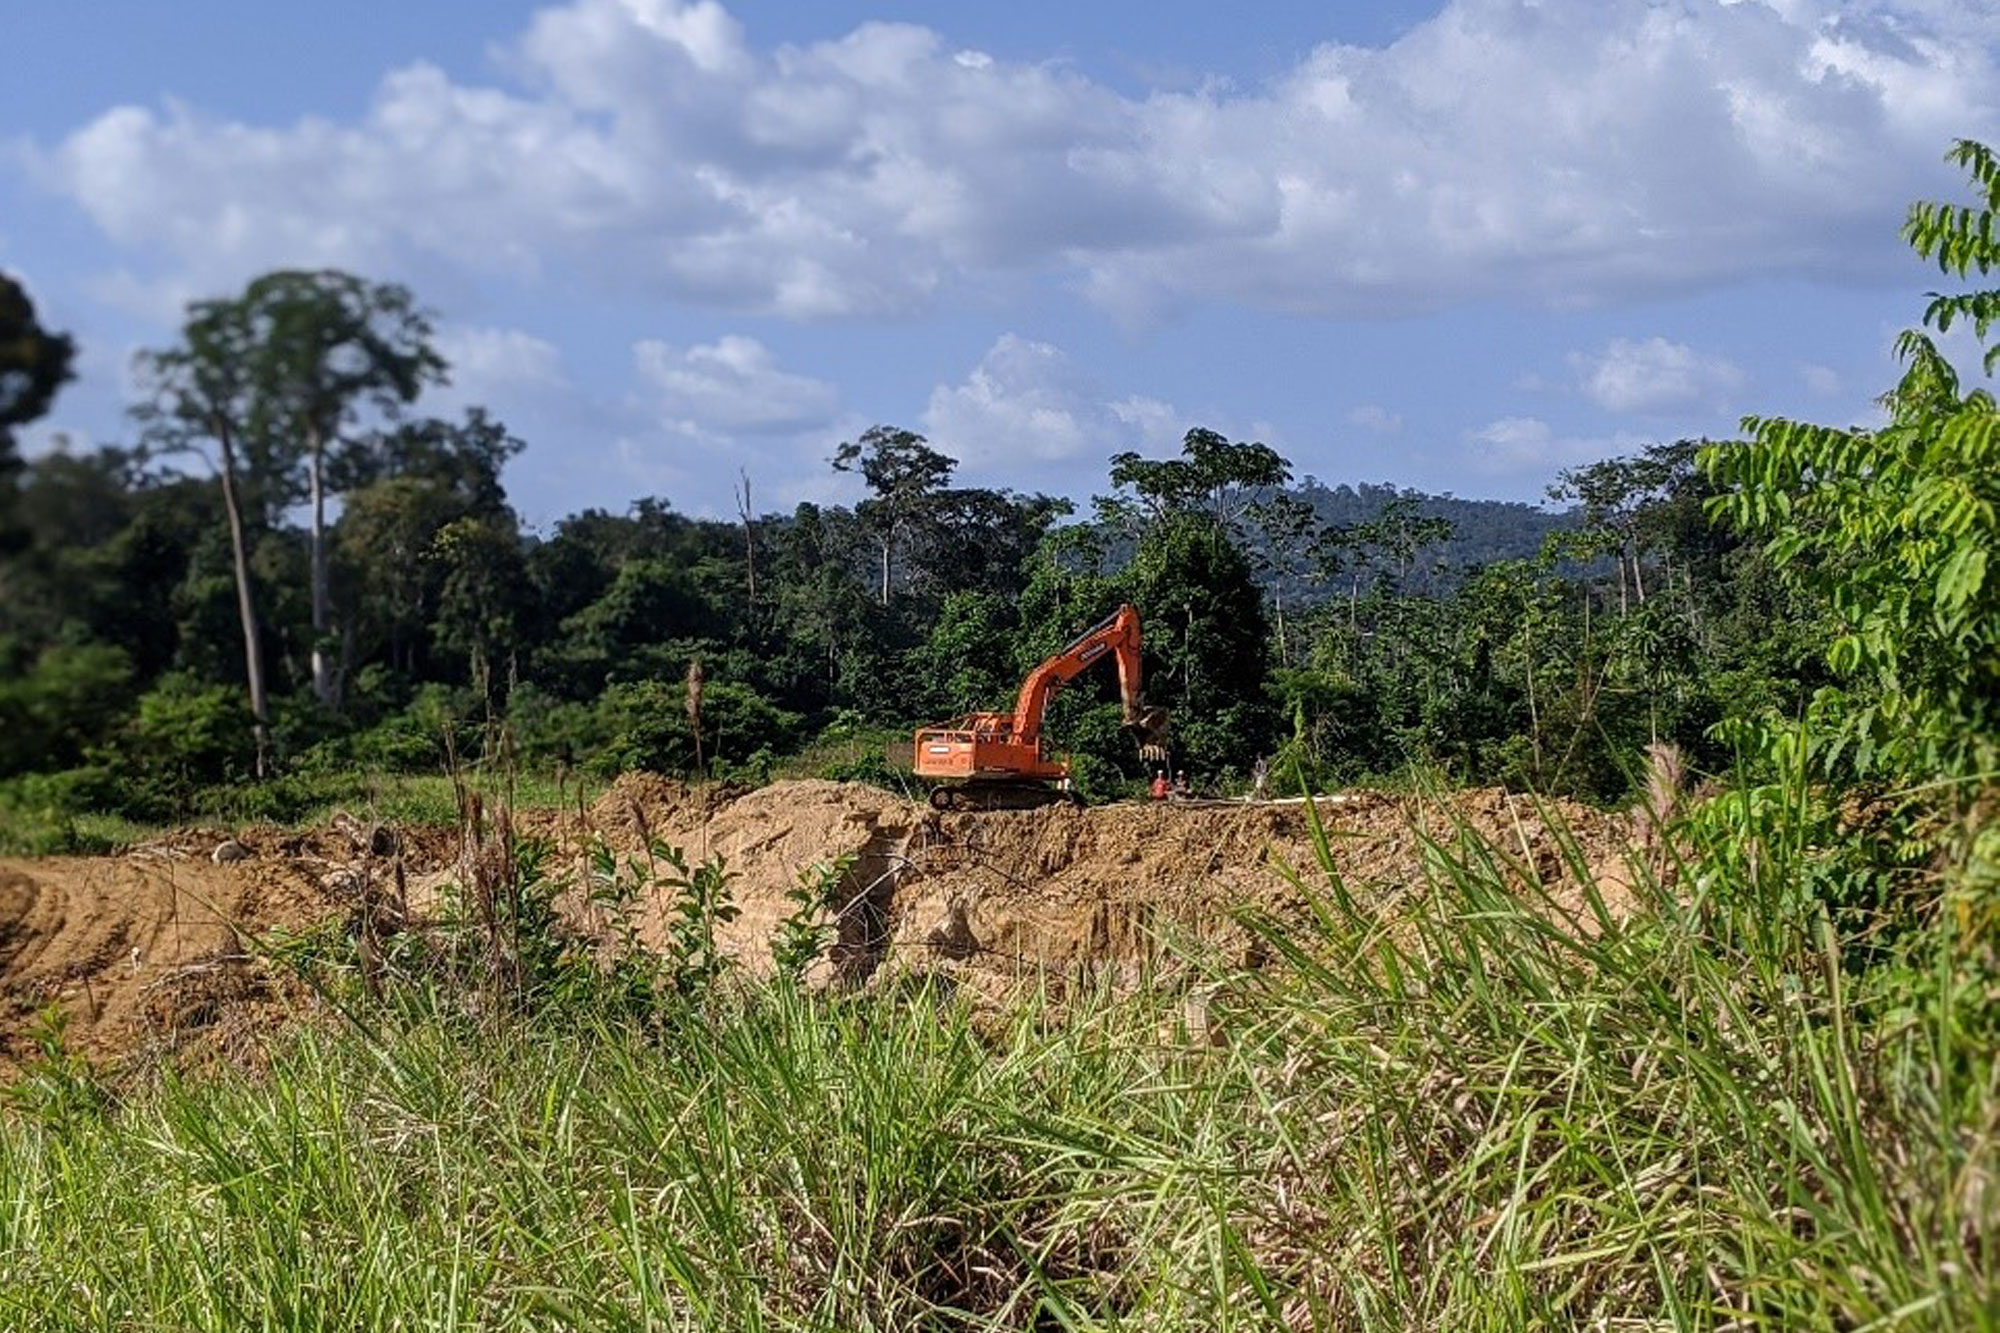 An excavator removing forest and vegetation to allow miners access to the sub-surface deposits.